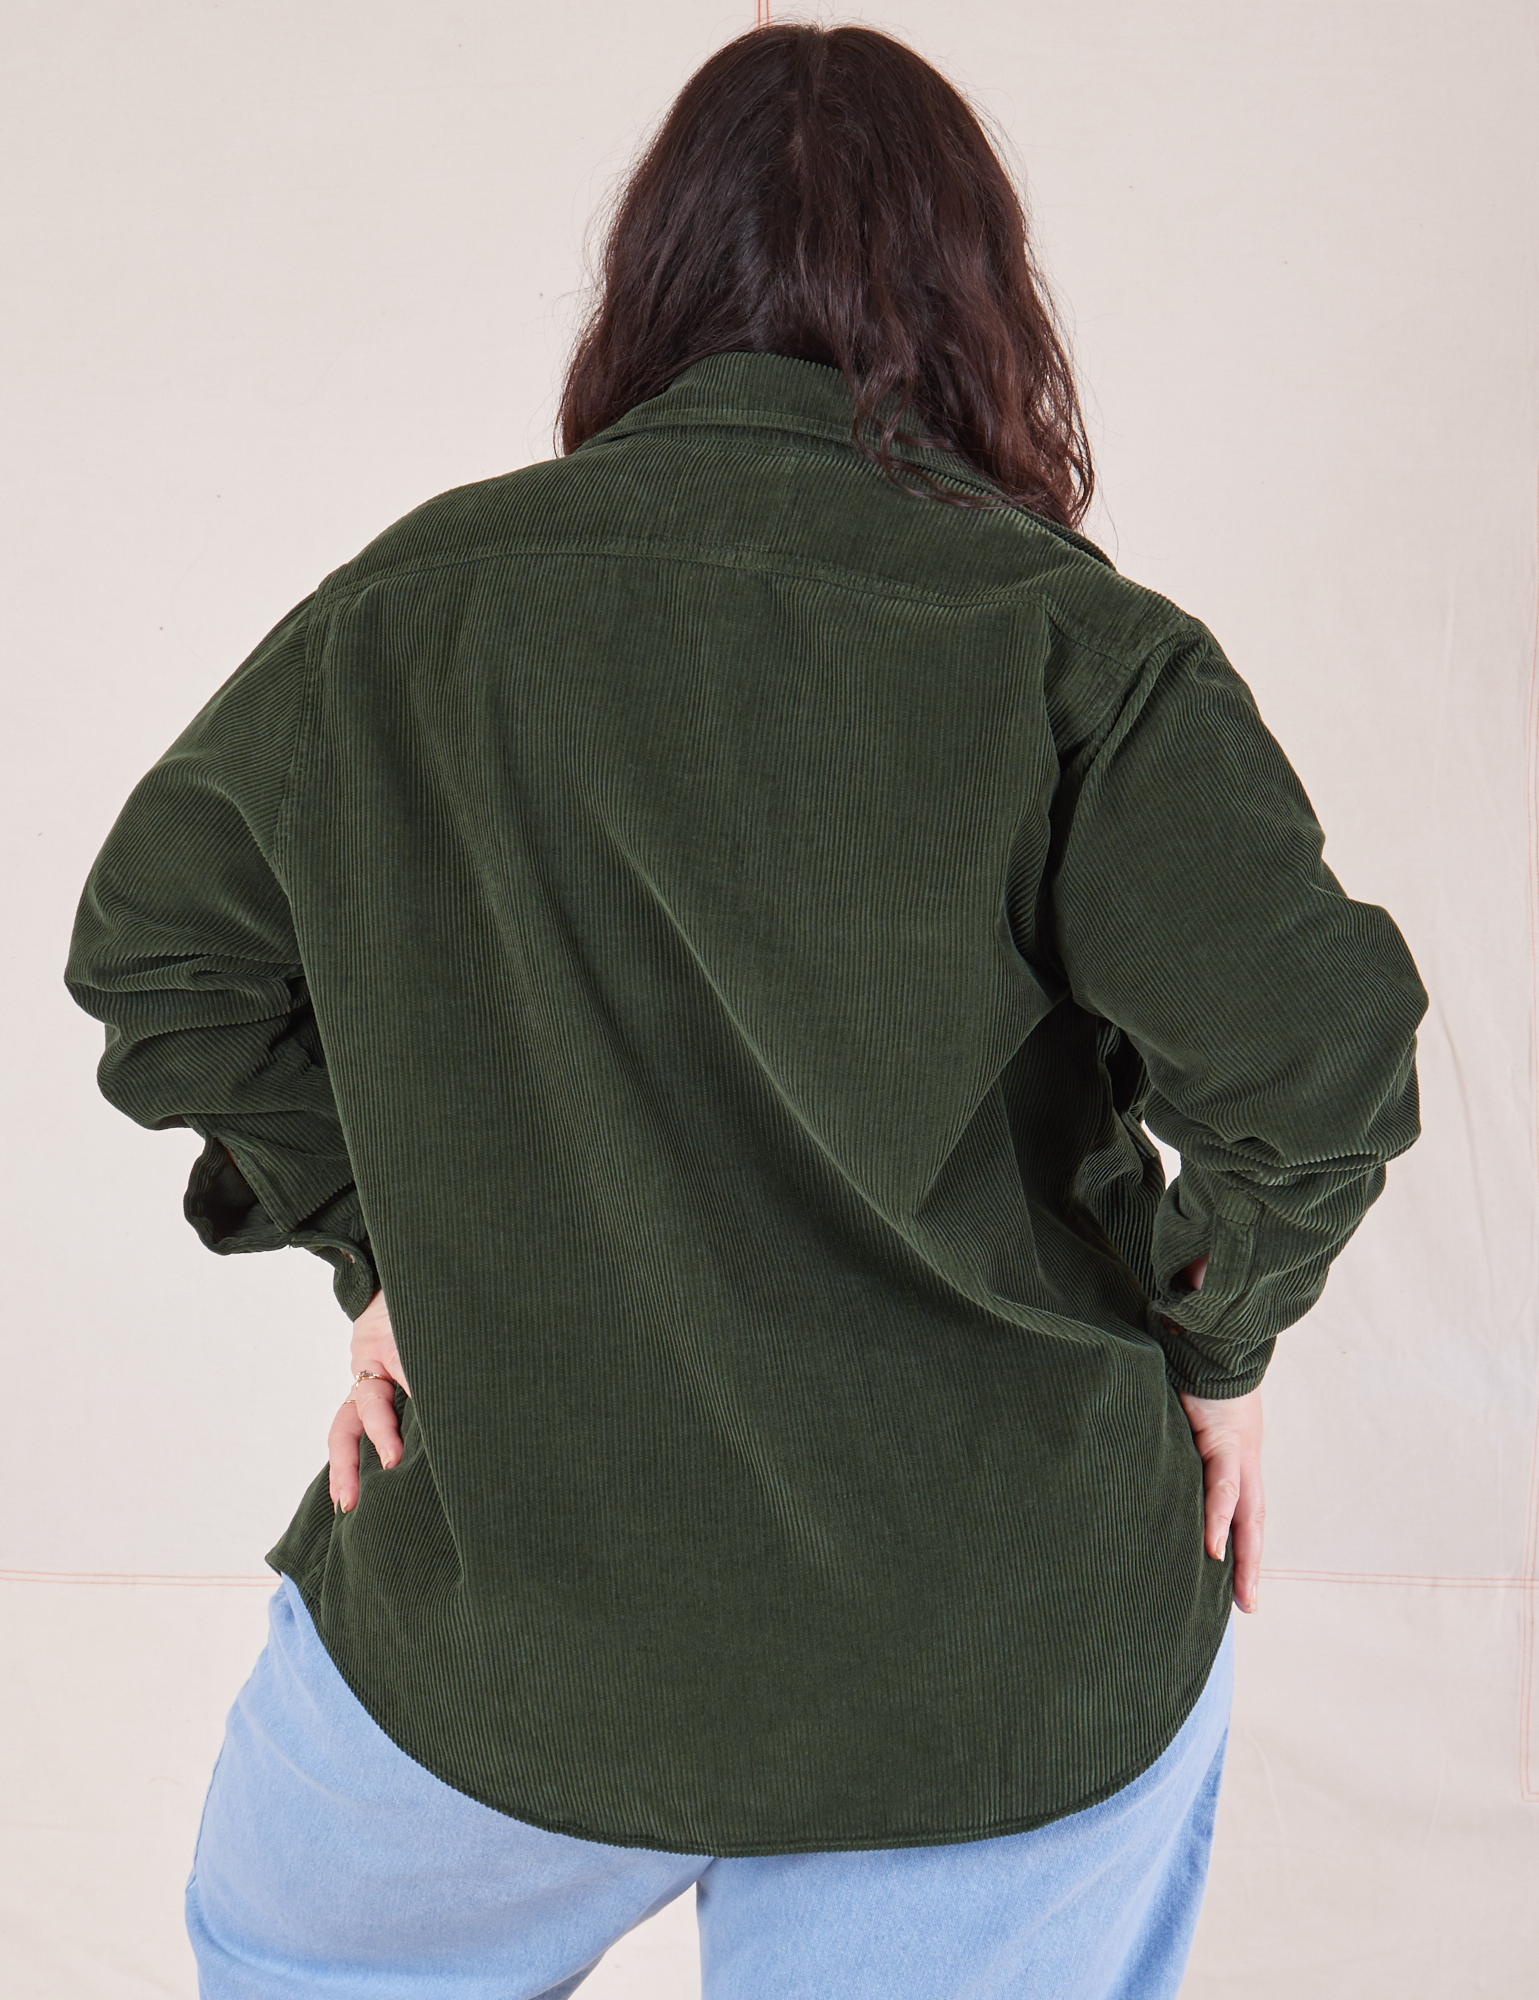 Corduroy Overshirt in Swamp Green back view on Ashley